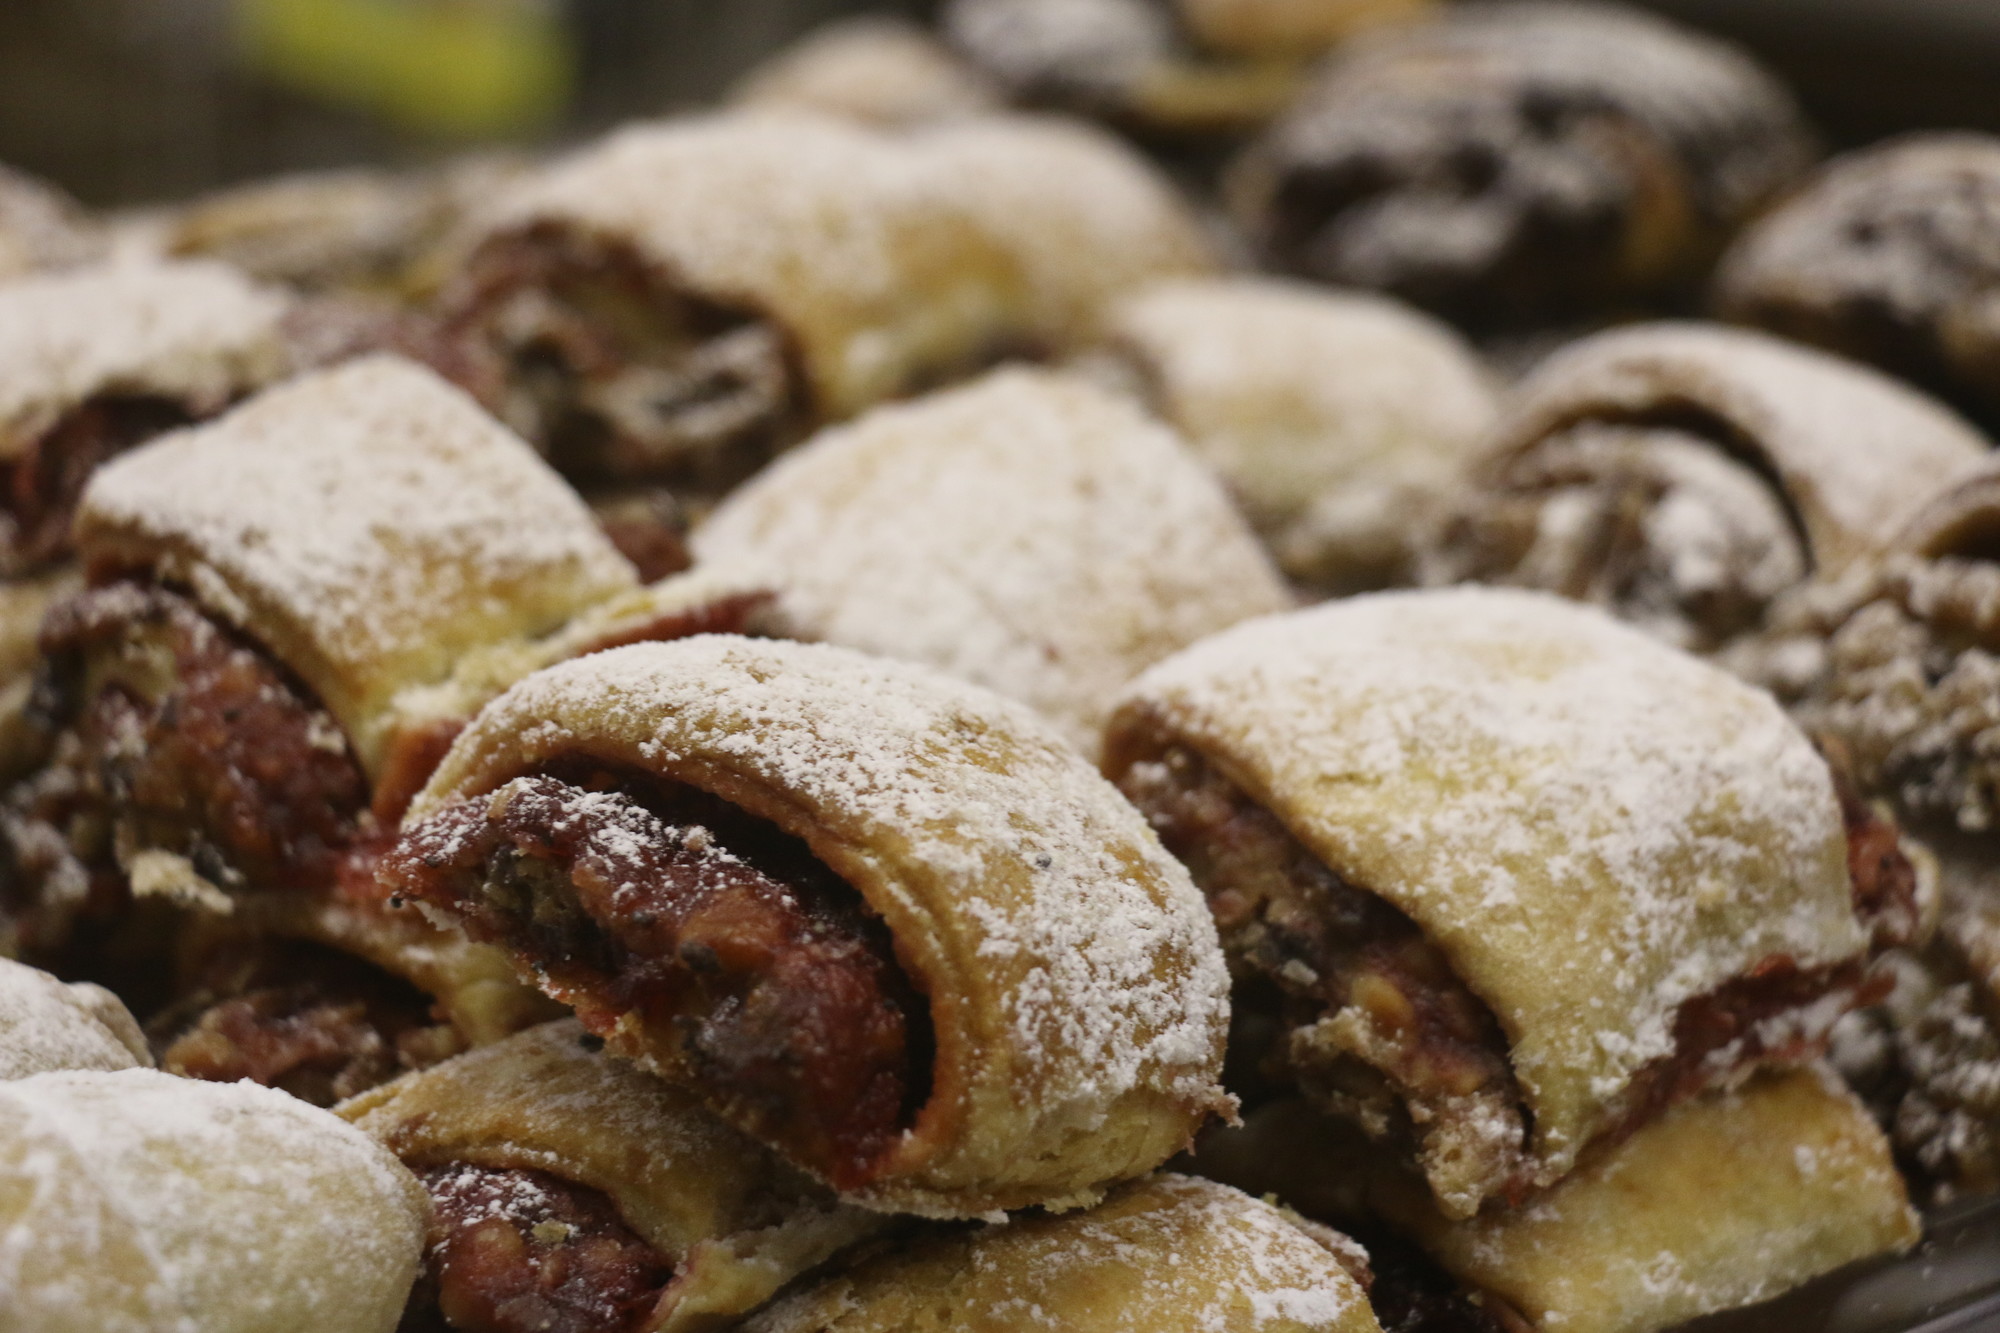 Rugelach and other authentic desserts are on display at the deli’s counter.